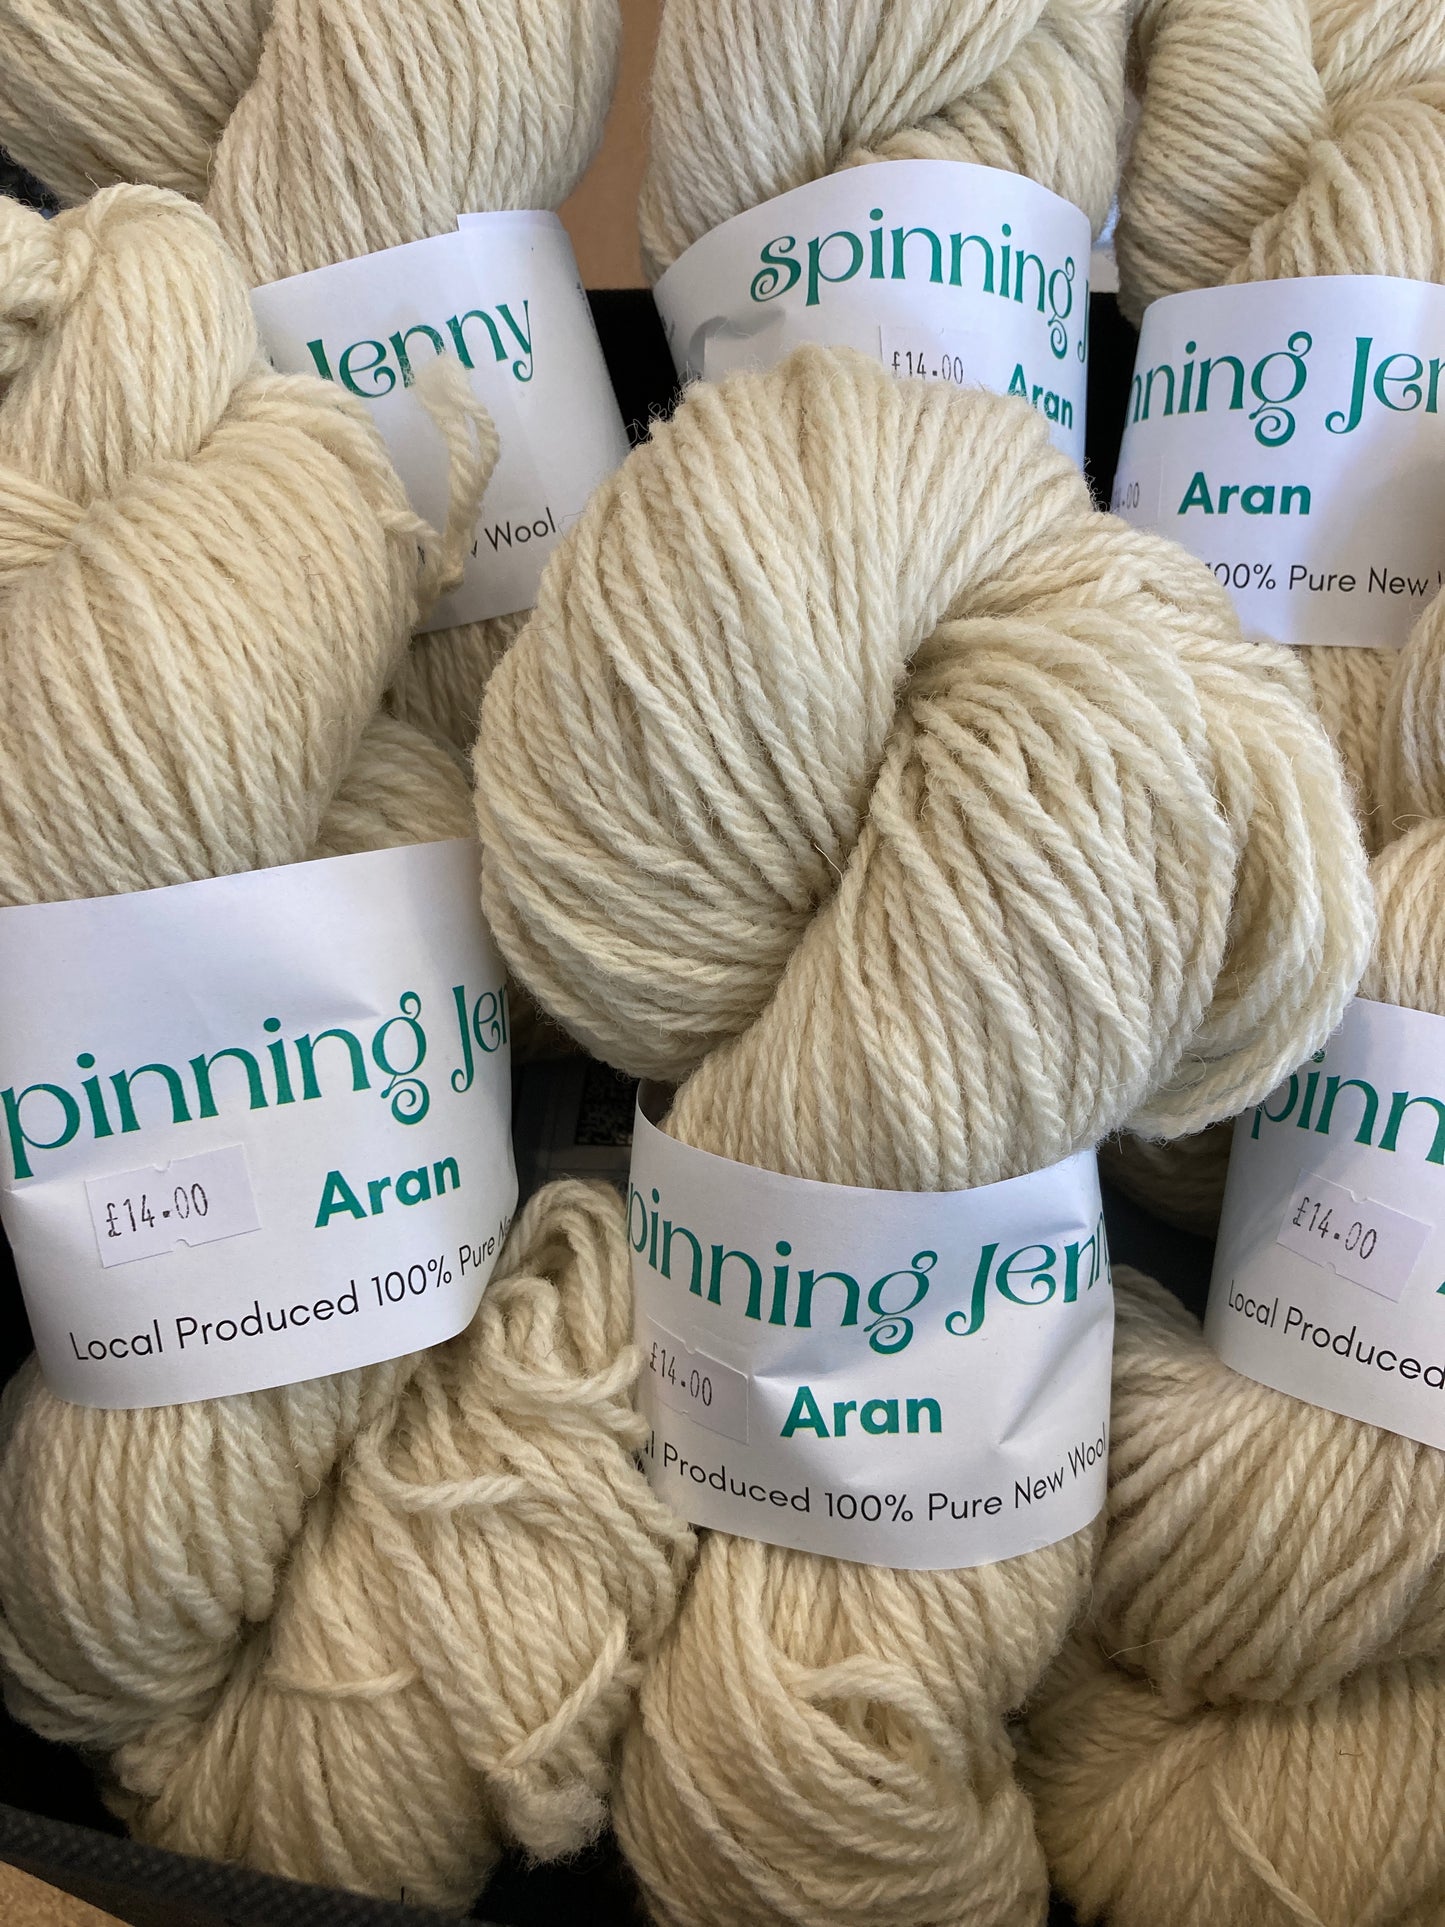 Locally Produced Aran Wool - very limited stock